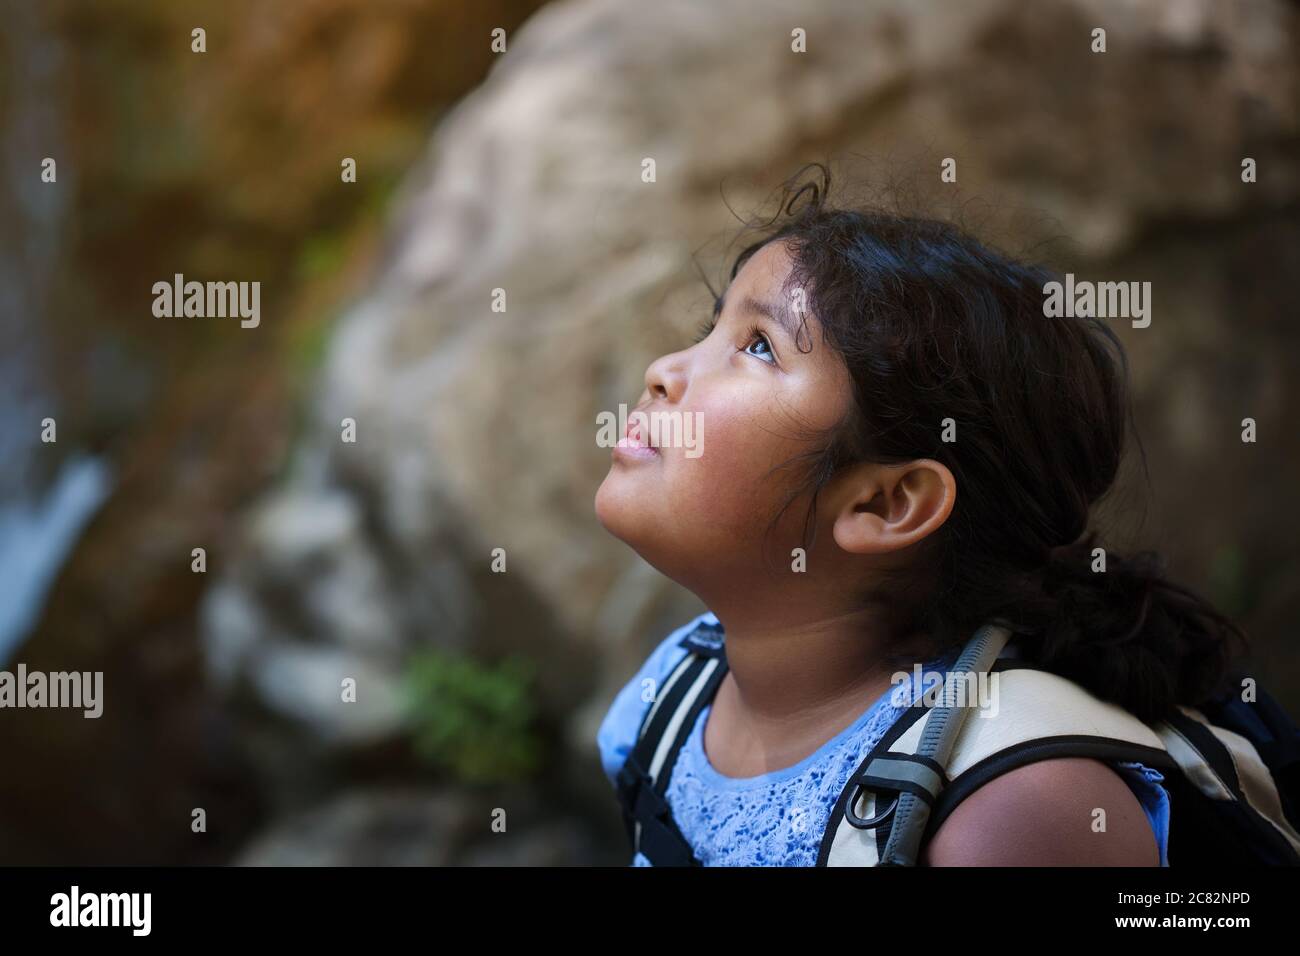 Young girl with hiking backpack looks up towards a difficult hiking trail ahead of her. Stock Photo